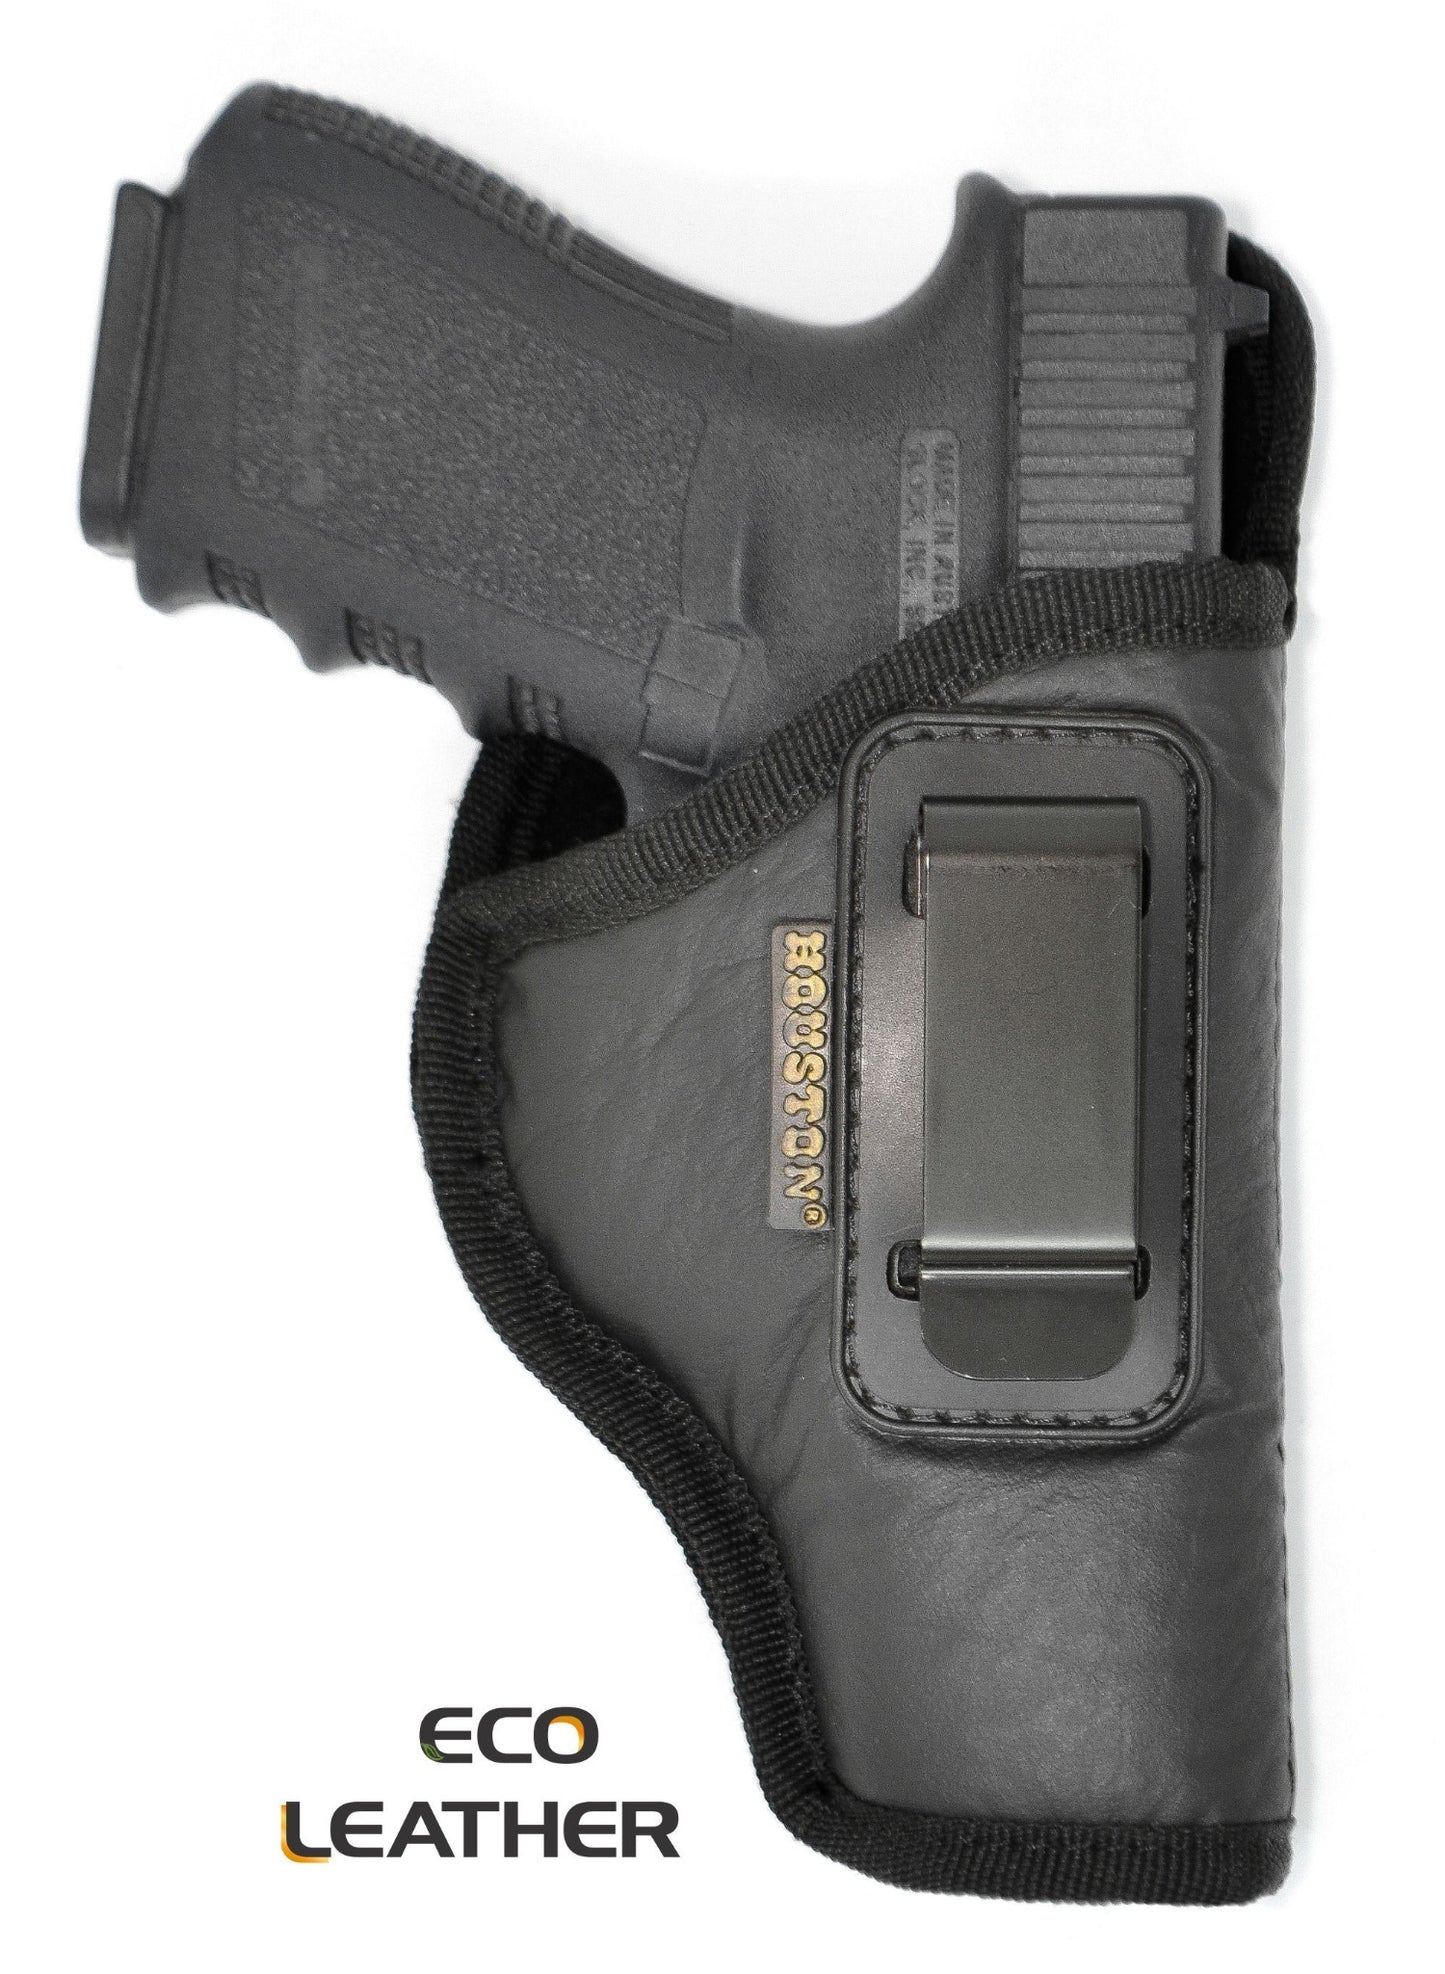  IWB Leather Holster, Inside Waistband Carry Gun Holster  Compatible with Glock 19/43/43X Springfield XDS/Hellcat Taurus  G2C/G3/G3C/GX4 S&W M&P Shield 9mm Ruger LC9S/MAX 9/Security 9 HK CZ SCCY  CPX1 : Sports